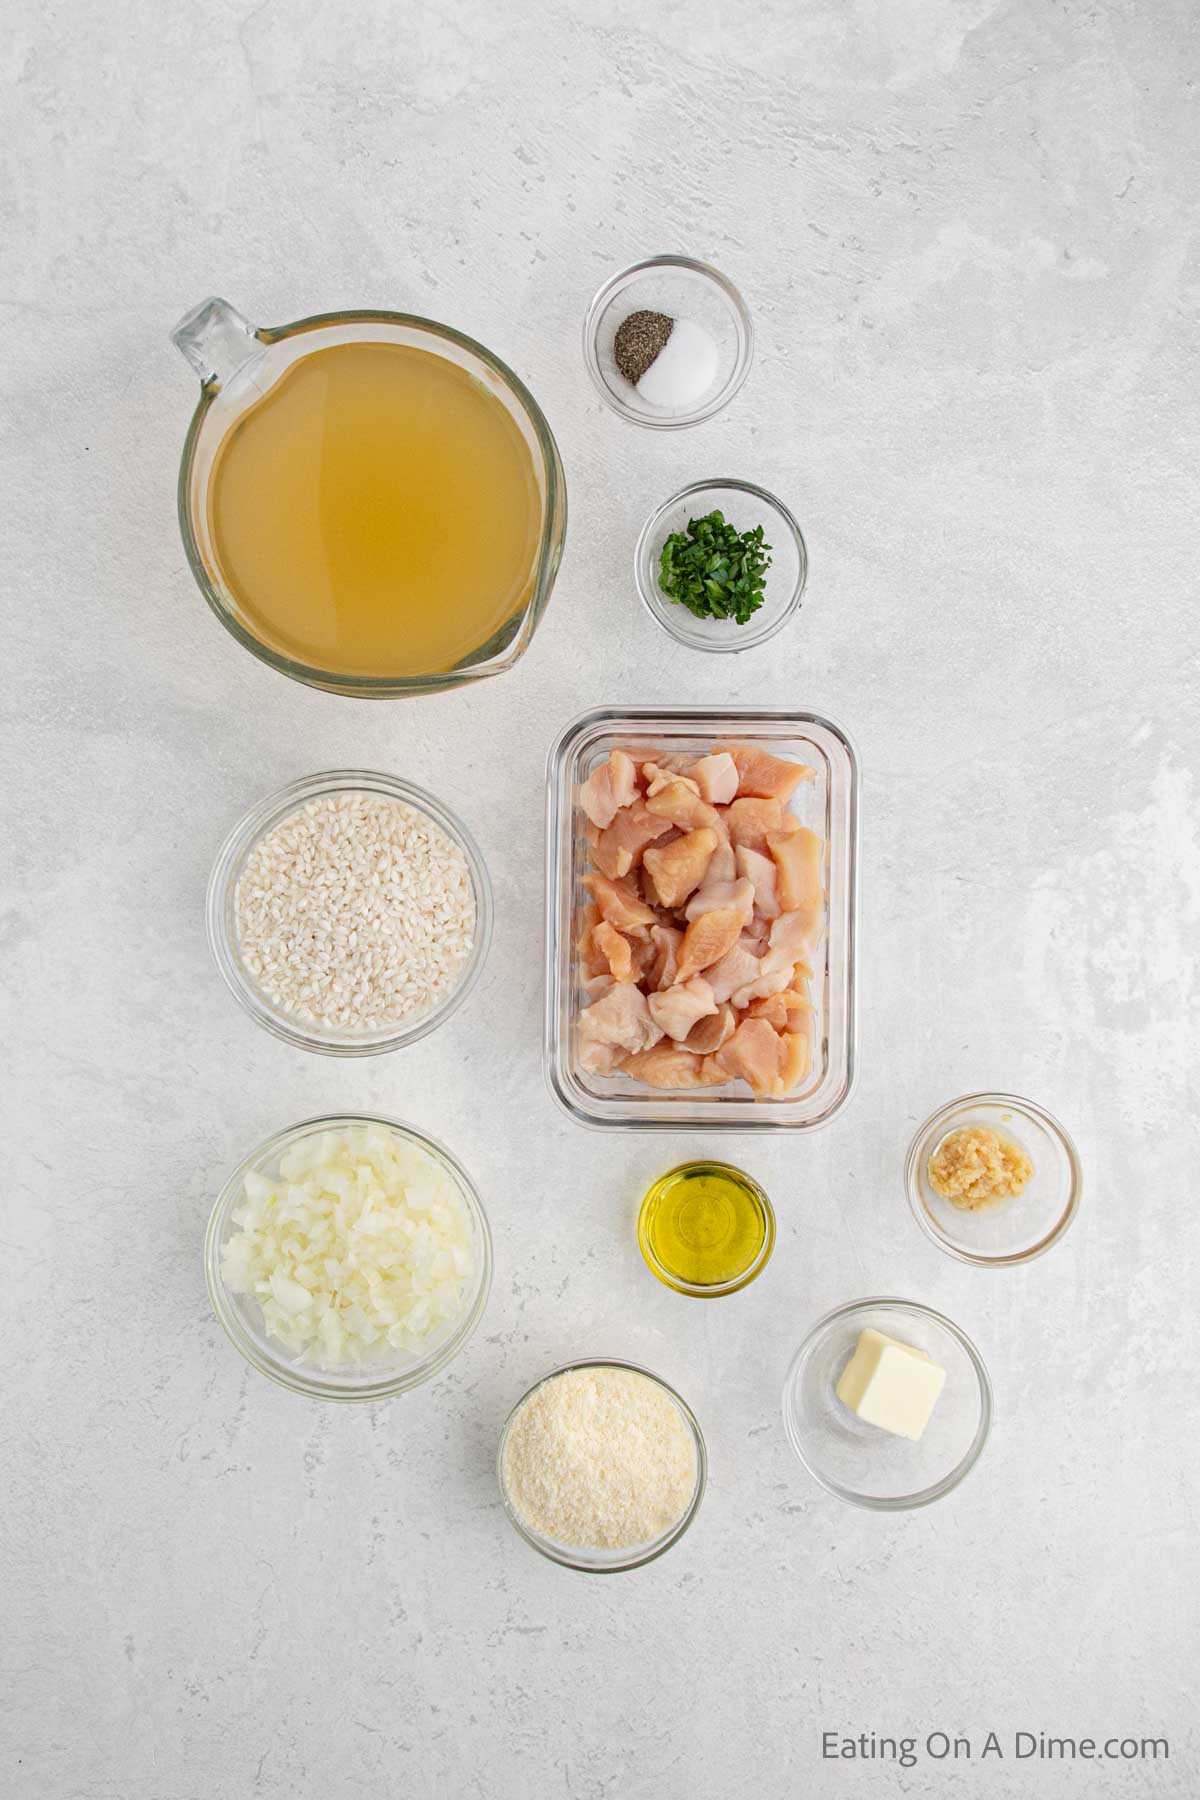 Chicken risotto ingredients - olive oil, chicken breasts, salt and pepper, onion, garlic, rice, chicken broth, parmesan cheese, butter, parsley